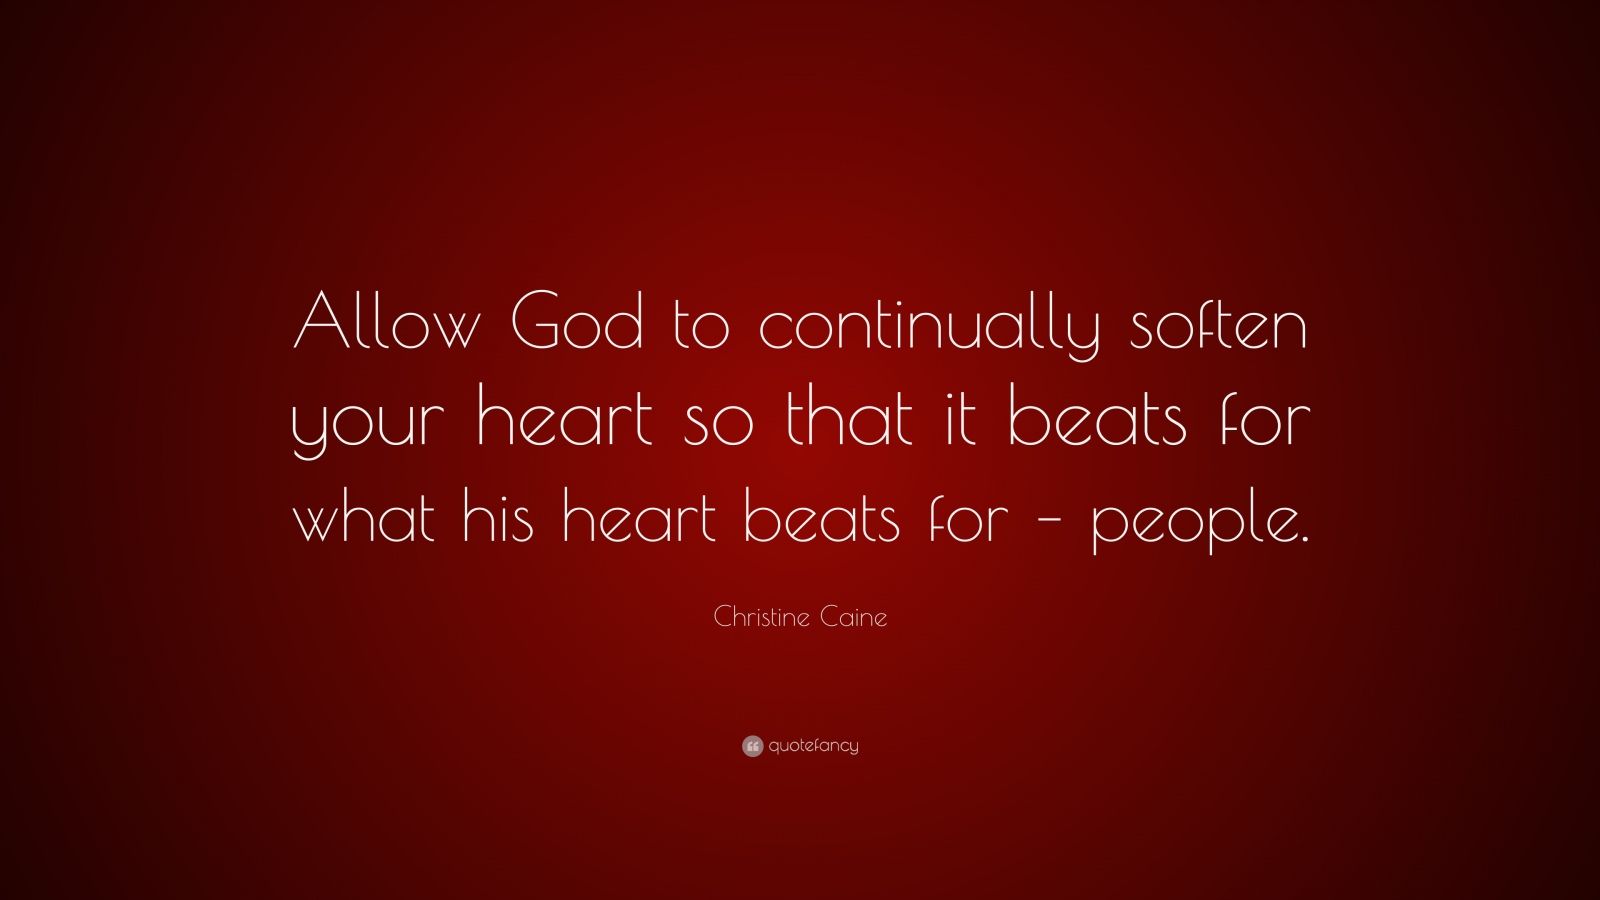 Christine Caine Quote: "Allow God to continually soften your heart so that it beats for what his ...